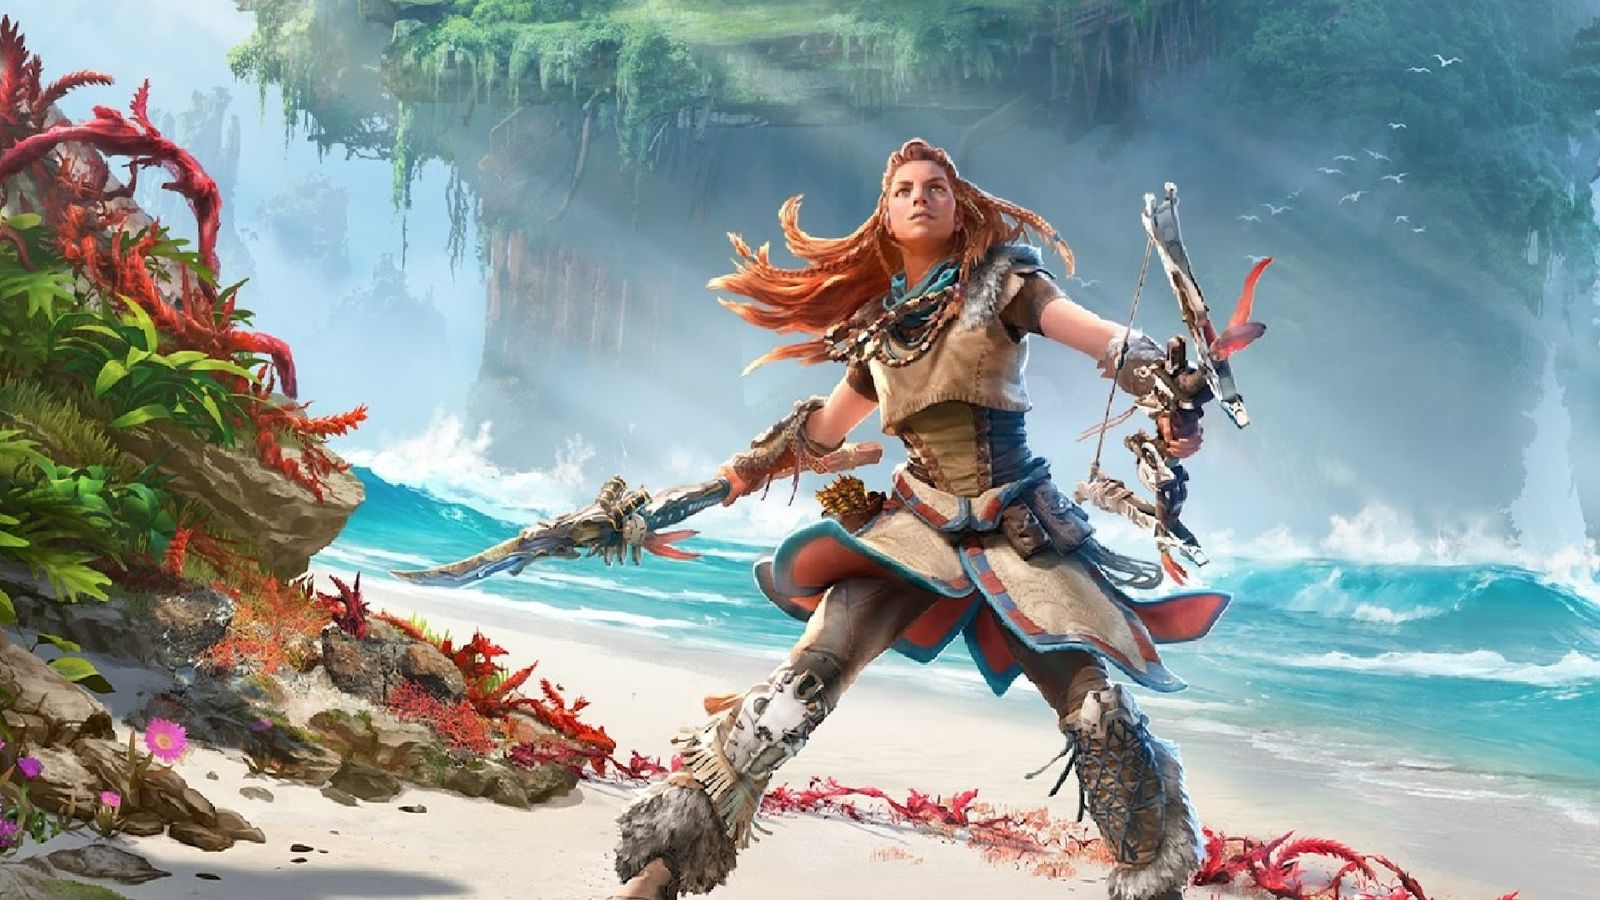 Aloy holding a bow and her spear in Horizon Forbidden West key art